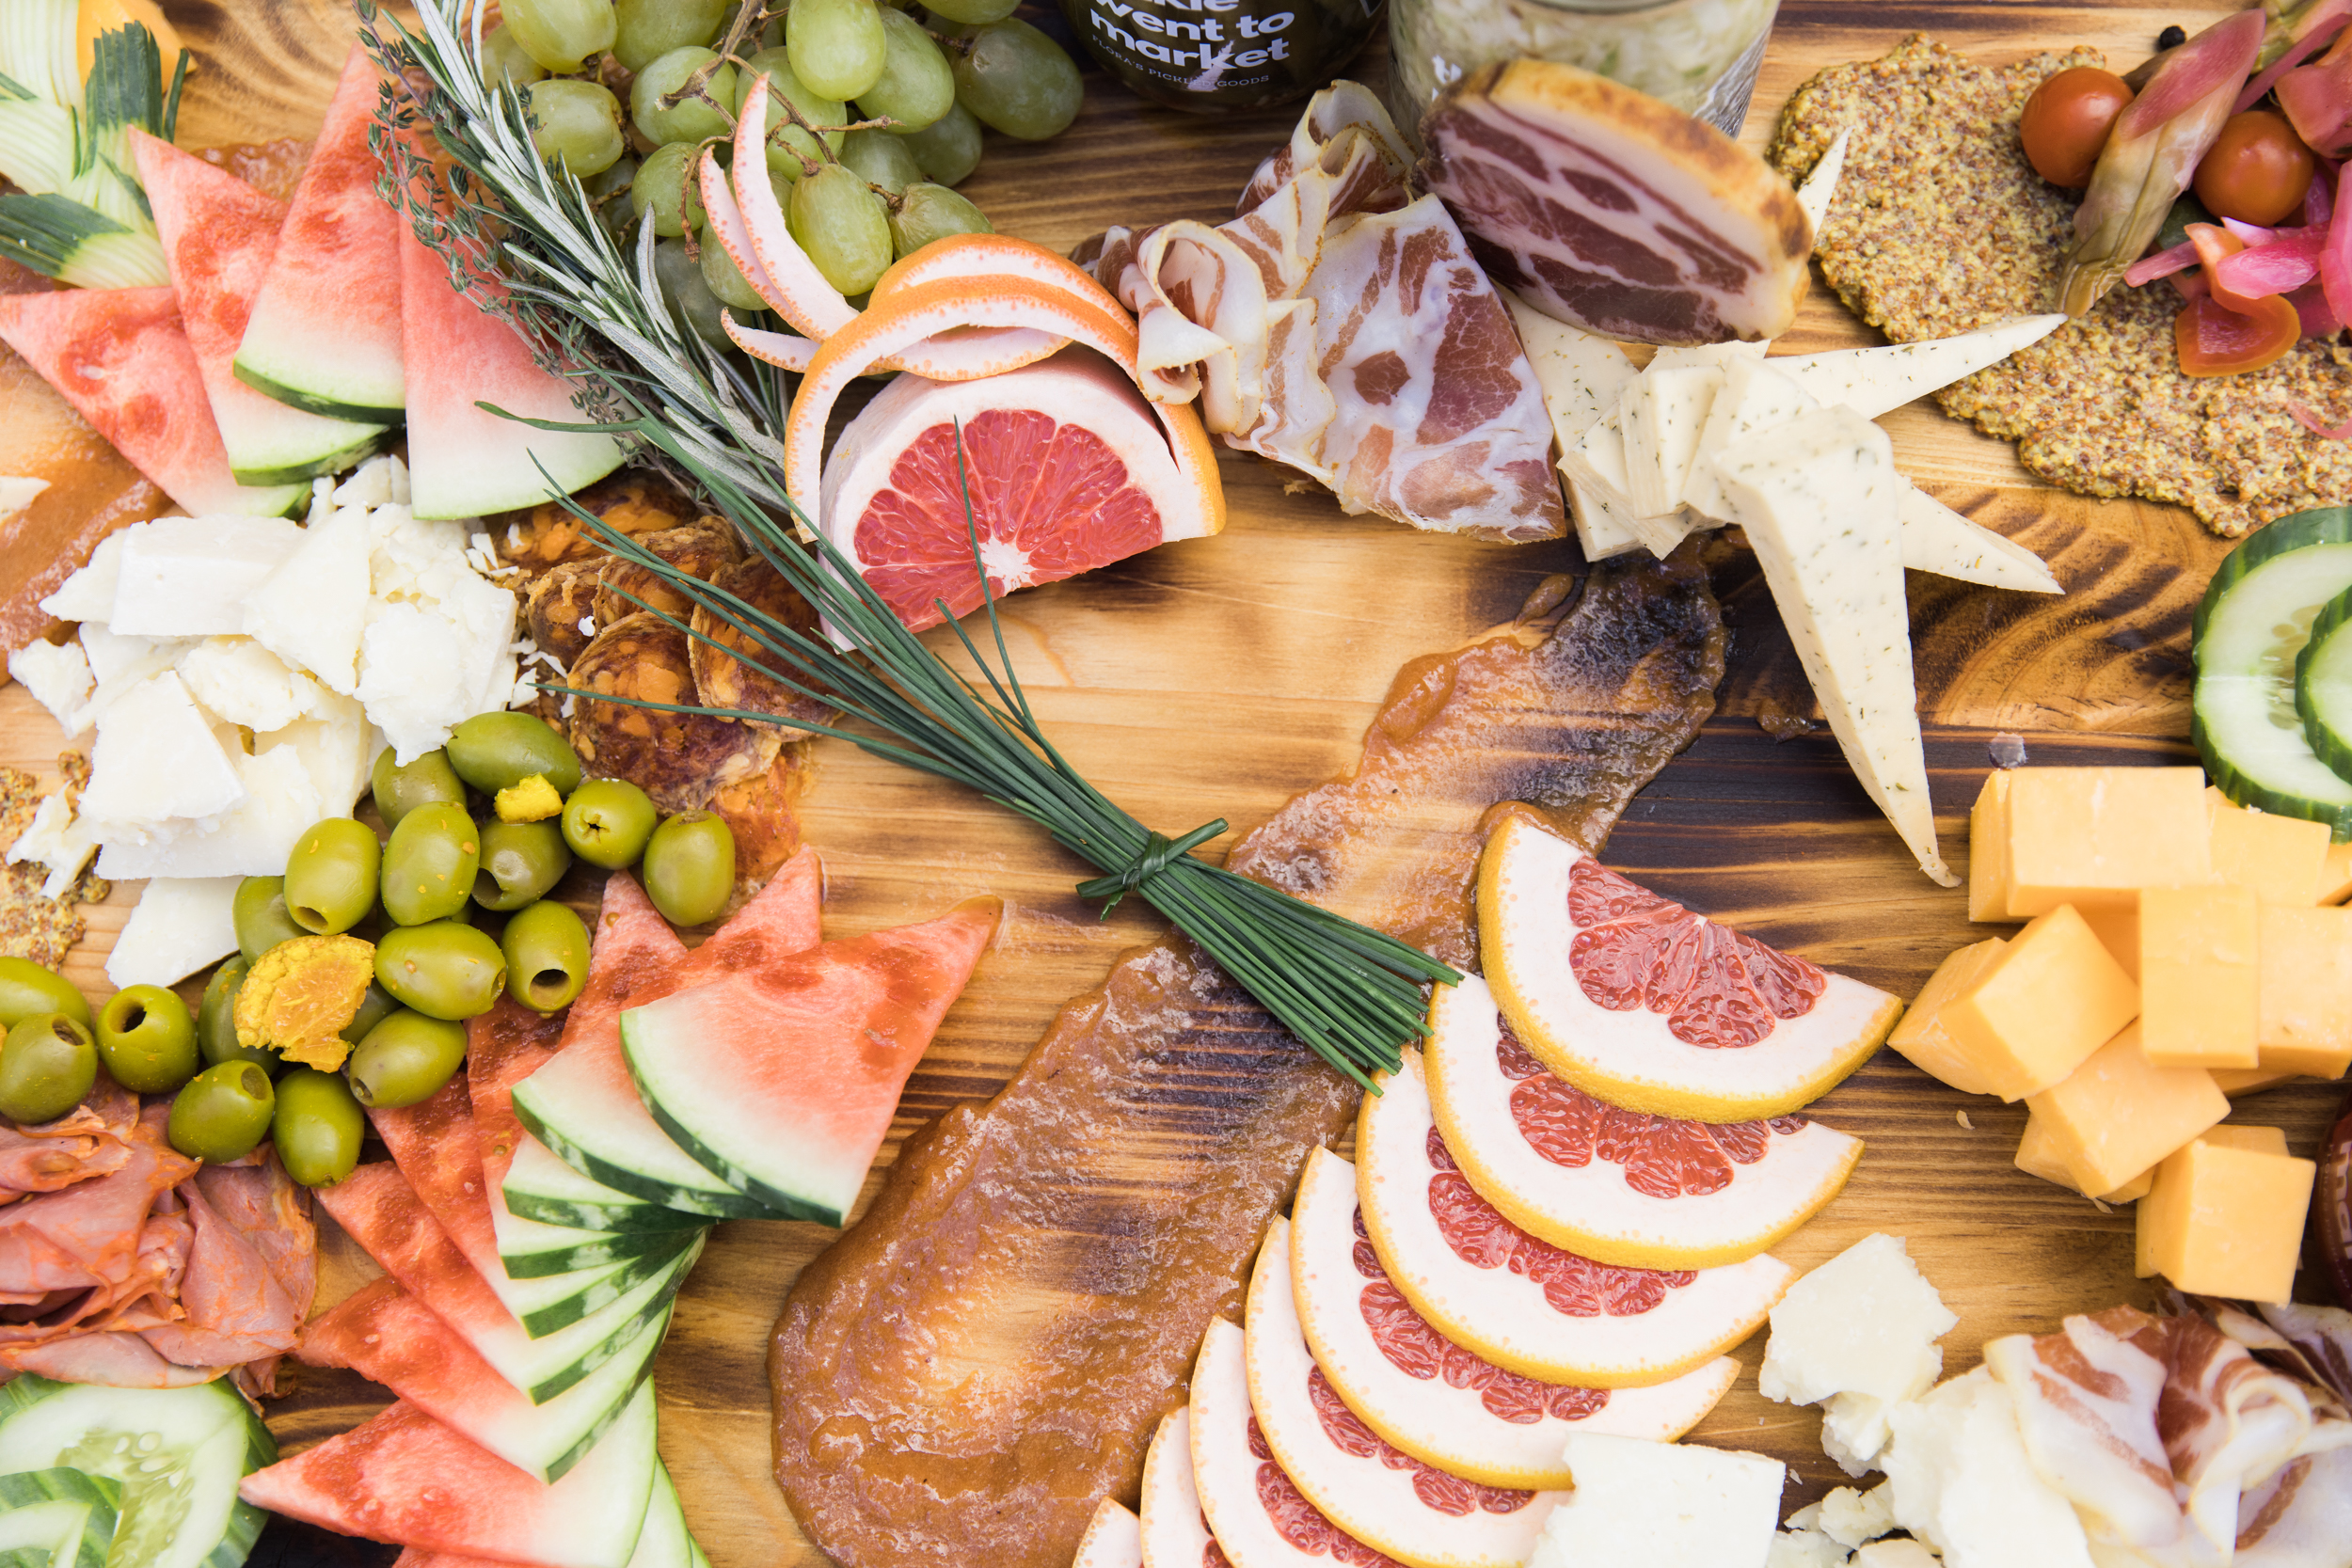 Charcuterie board by Vanessa Moon (Photo by Taylor Noel Photography)